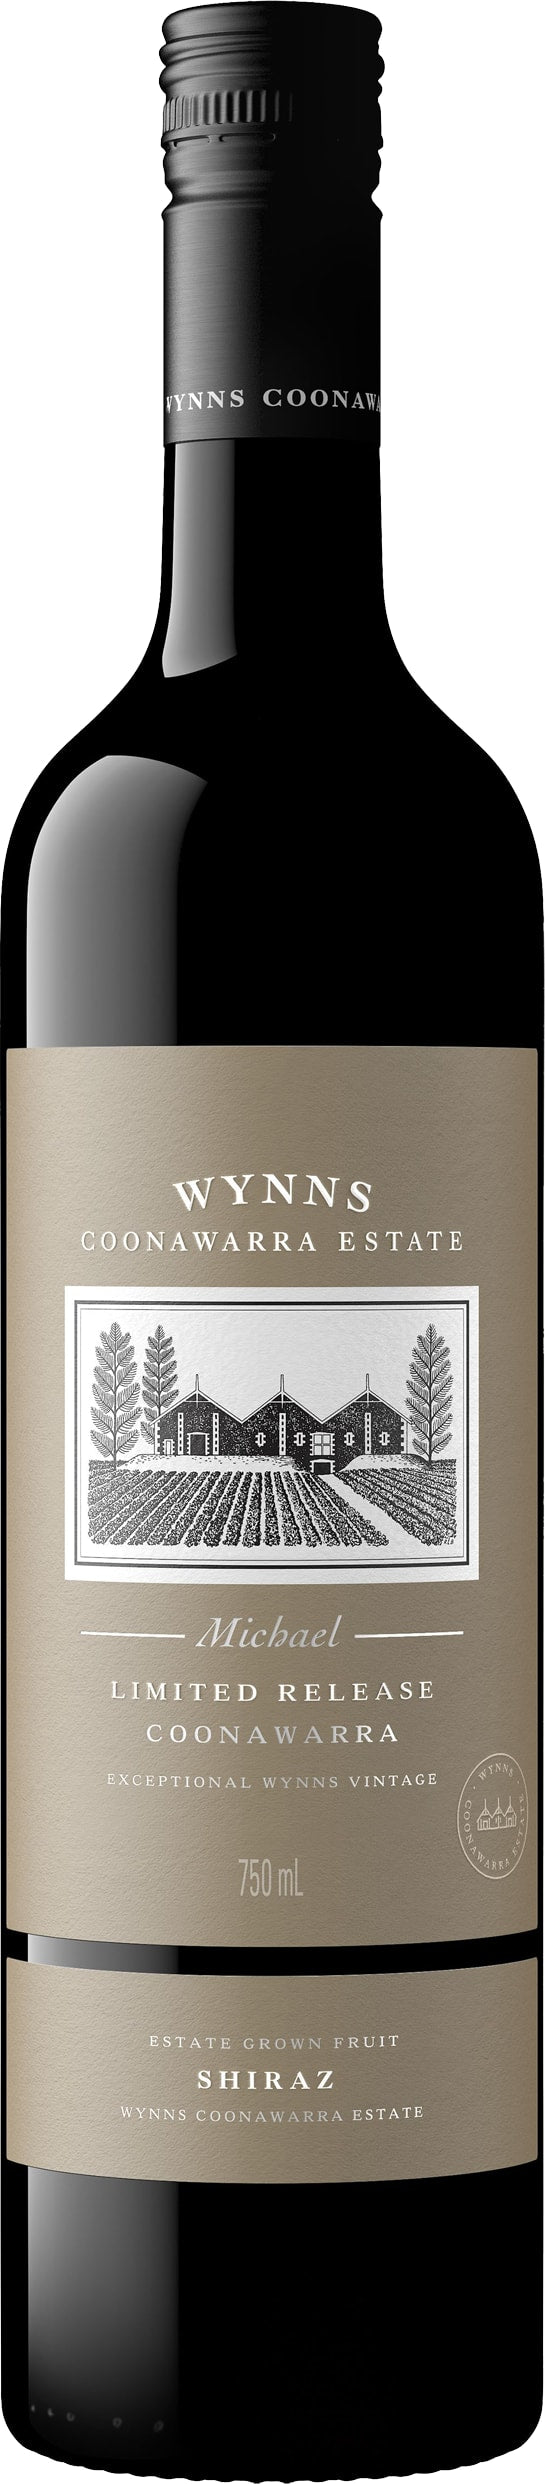 Wynns Michael Limited Release Shiraz 2016 6x75cl - Just Wines 